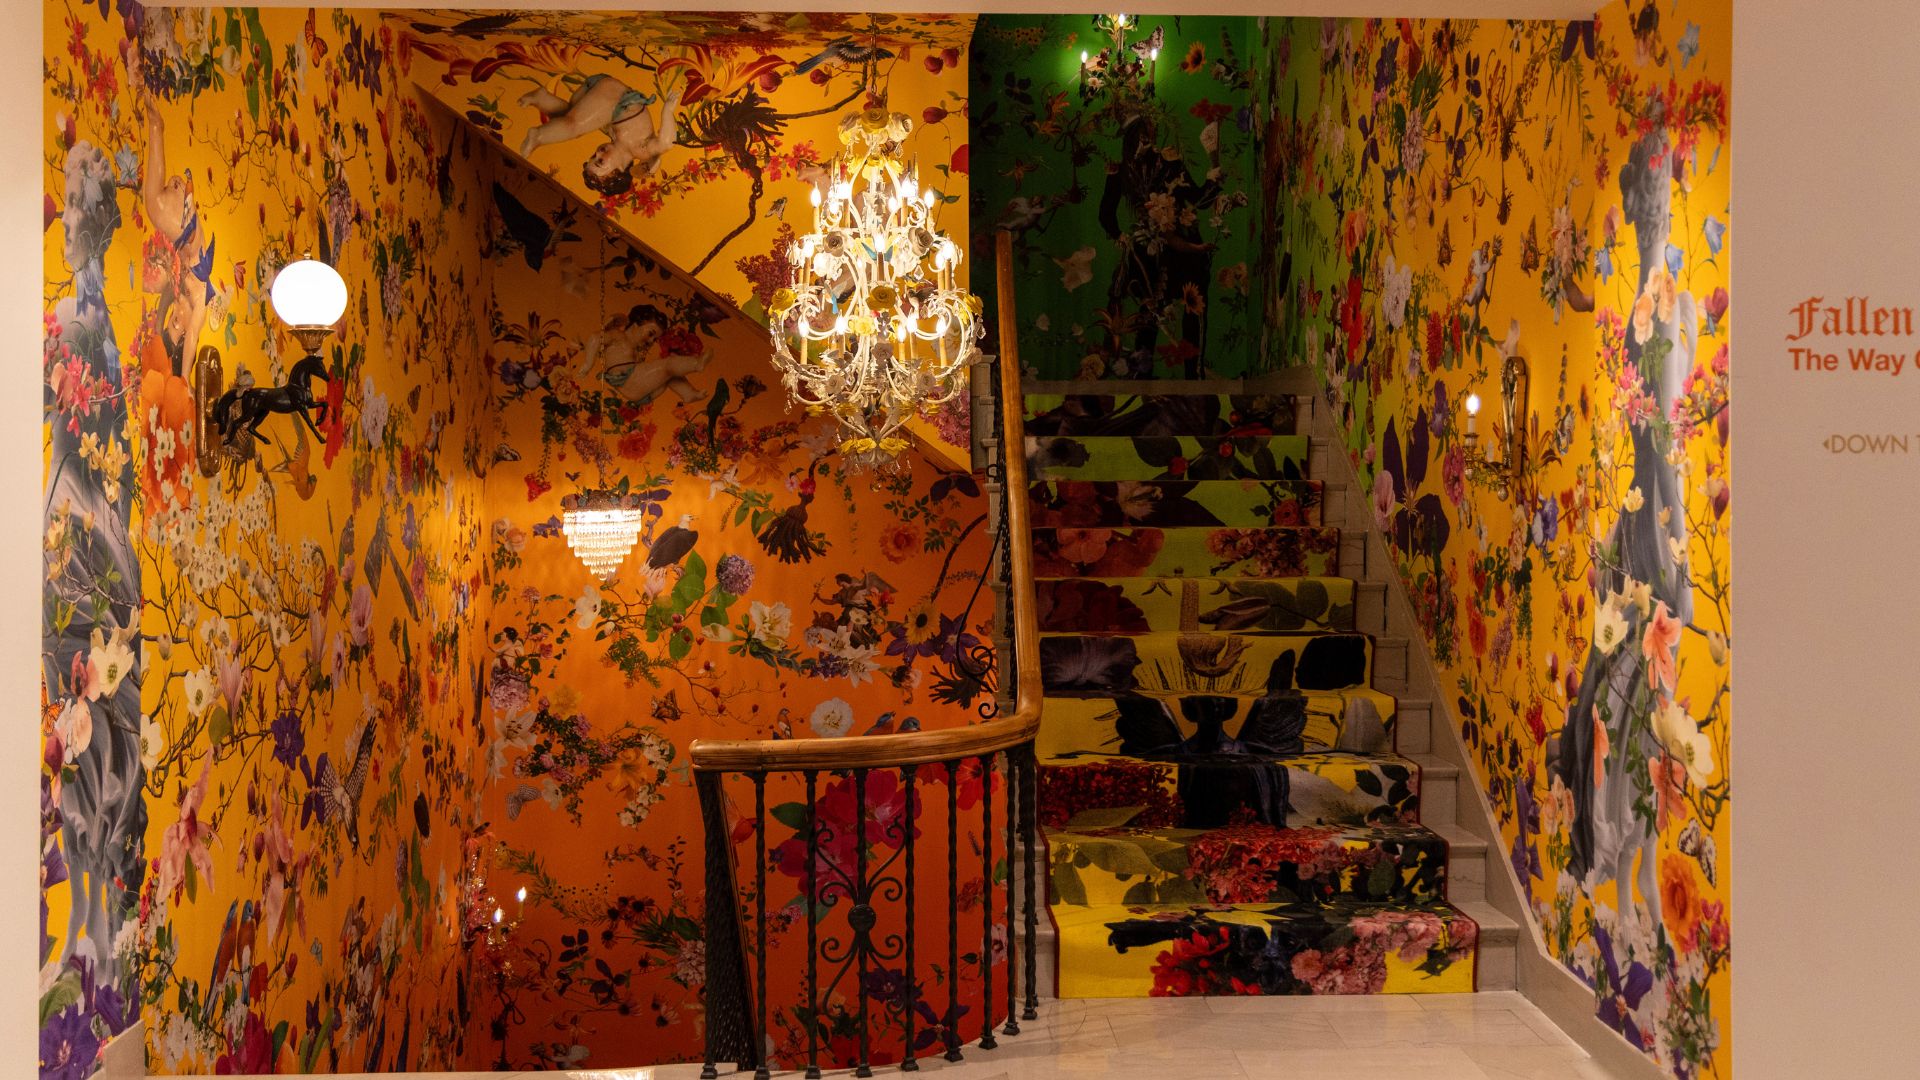 This grand staircase has thousands of stories in the vibrant wallpaper and colorful carpet.